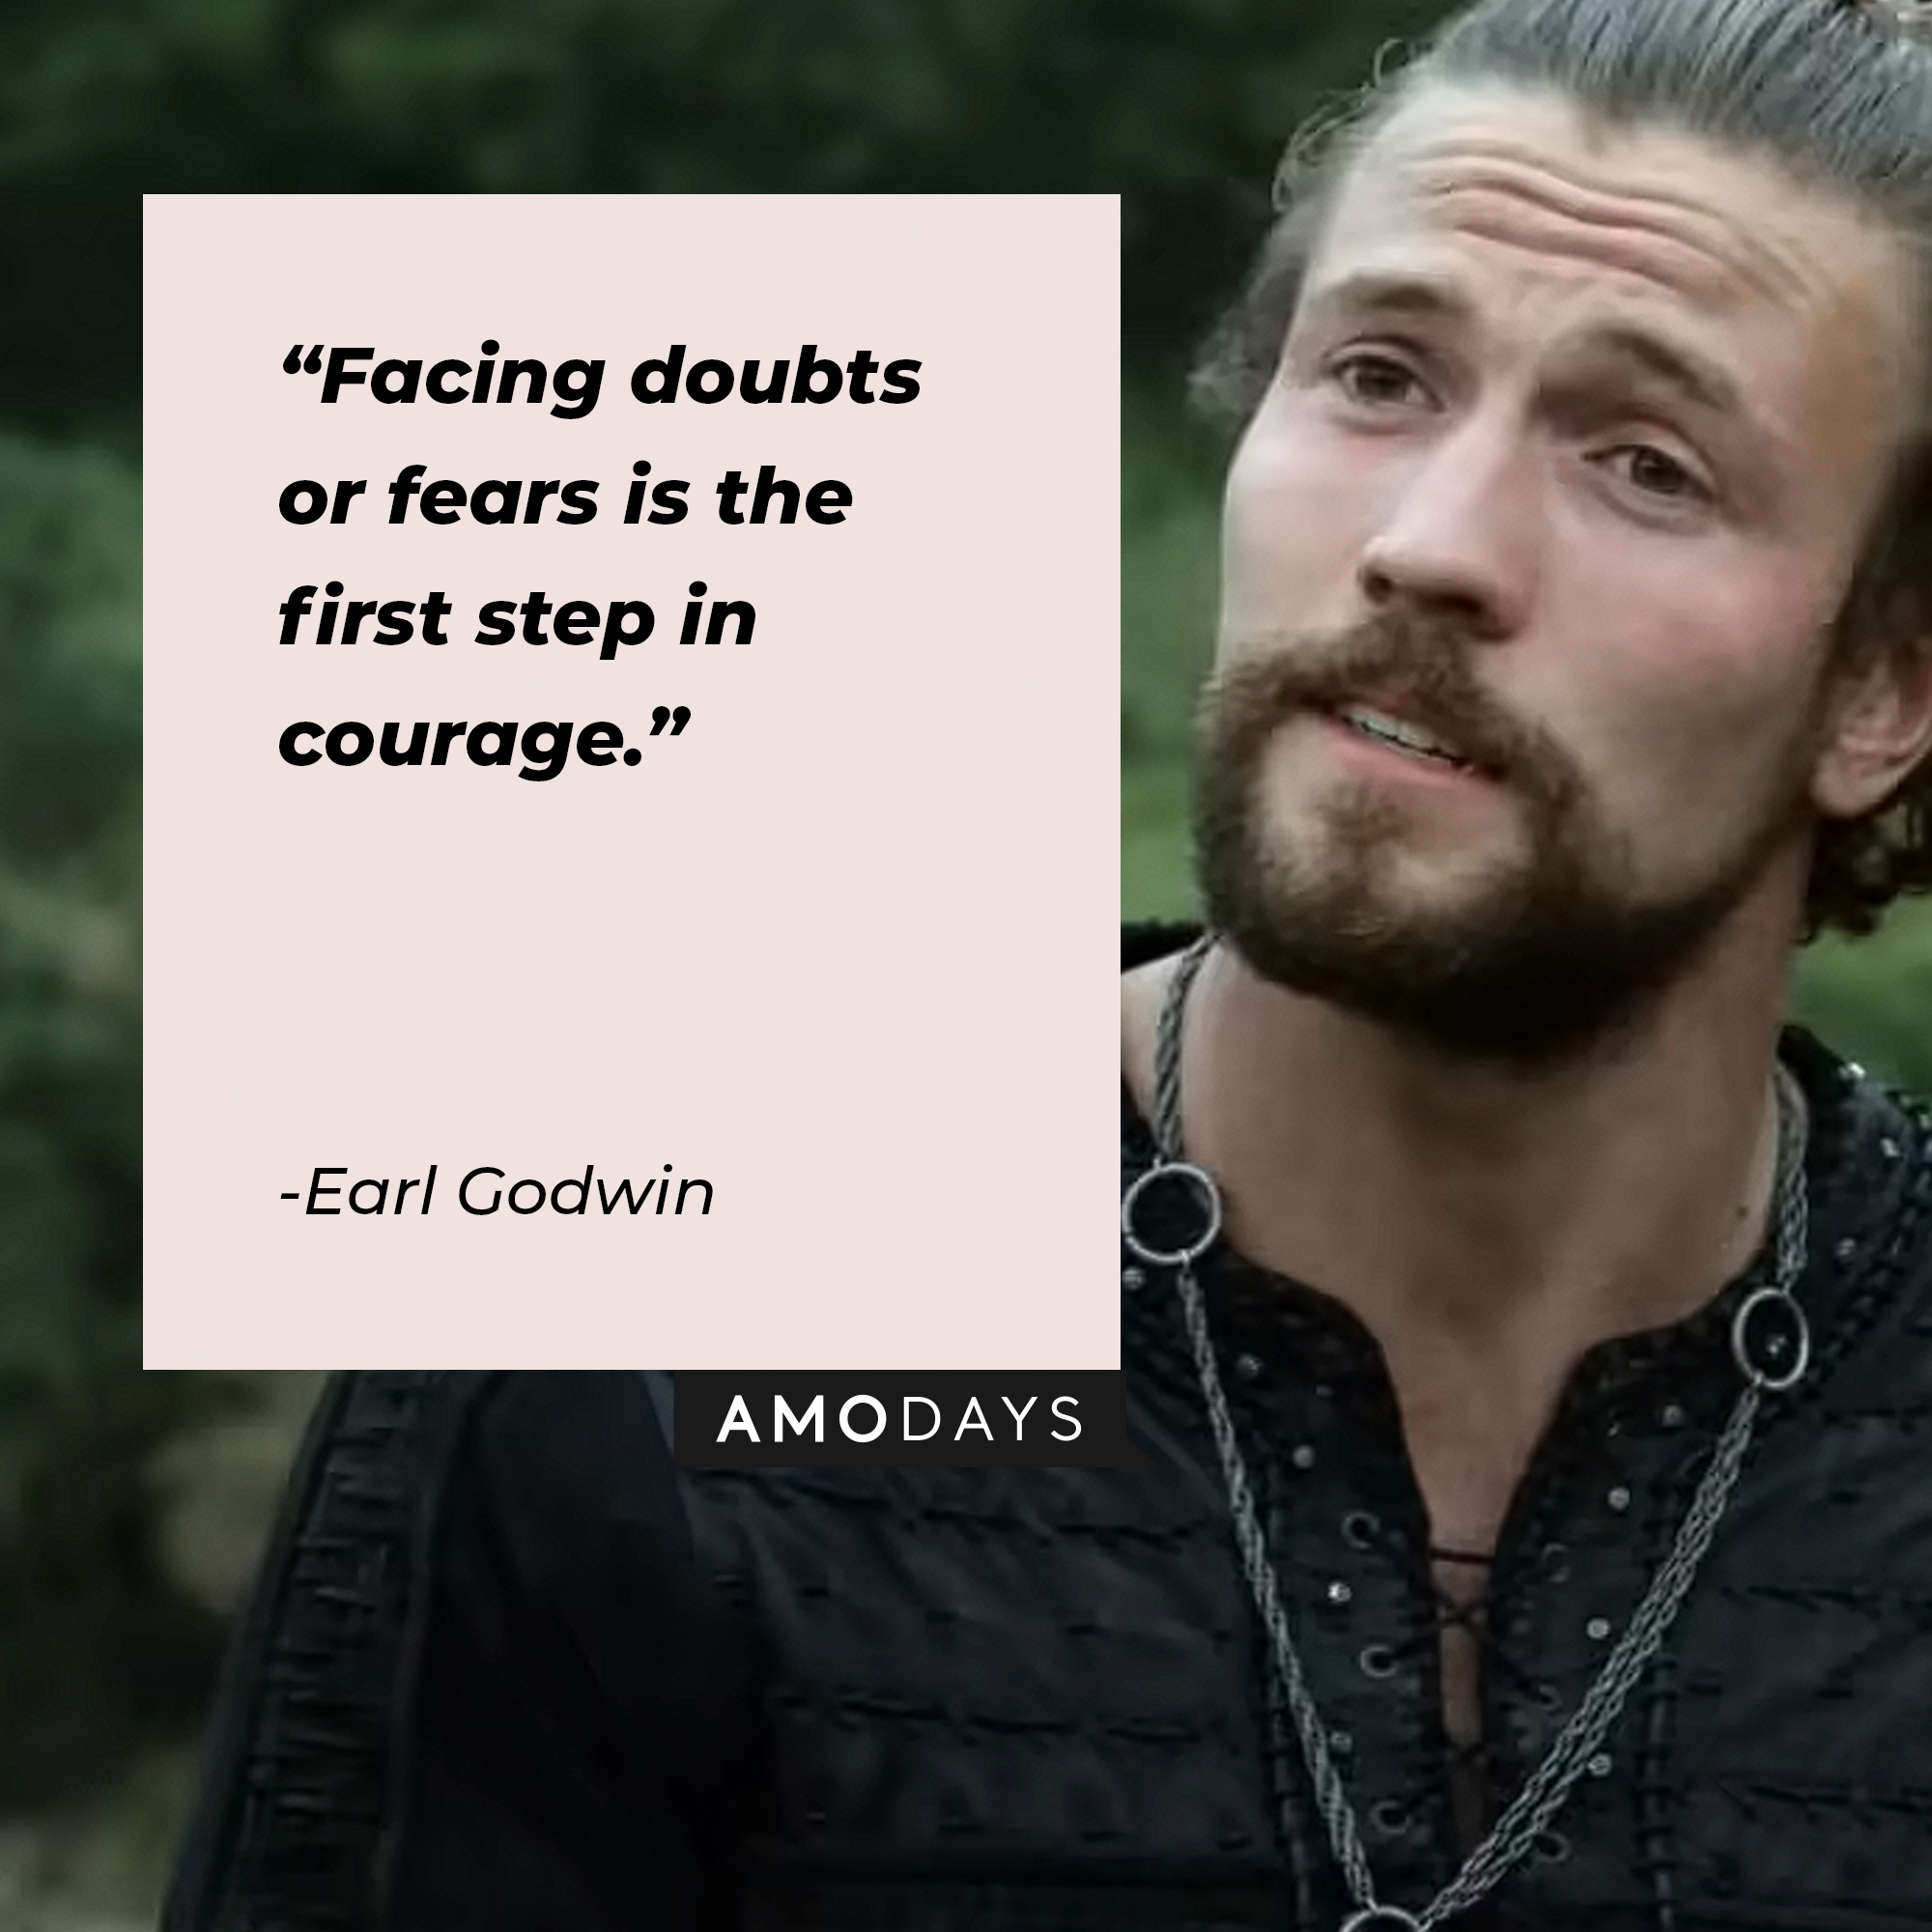 Earl Godwin's quote: "Facing doubts or fears is the first step in courage." | Image: youtube.com/Netflix